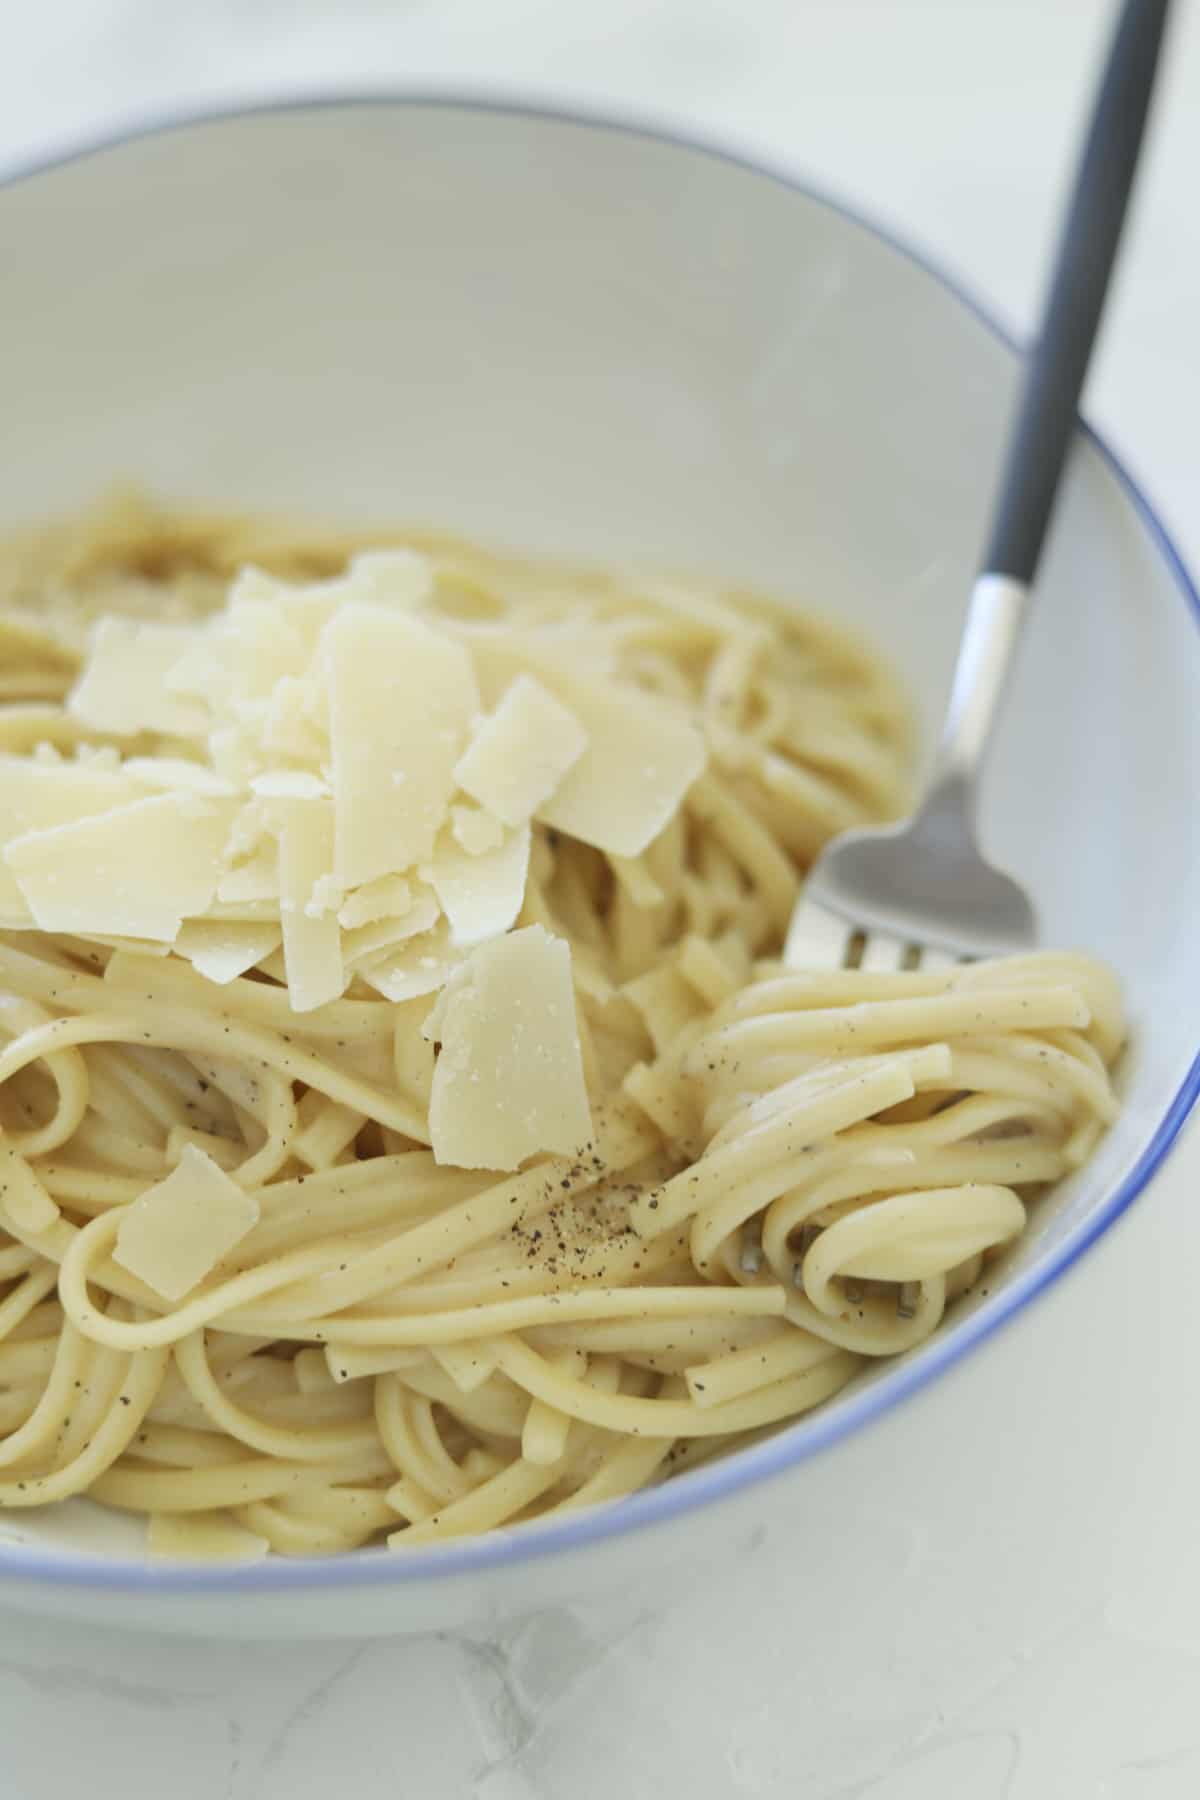 a fork twirling a bite of cacio e pepe in a bowl of pasta topped with Parmesan flakes